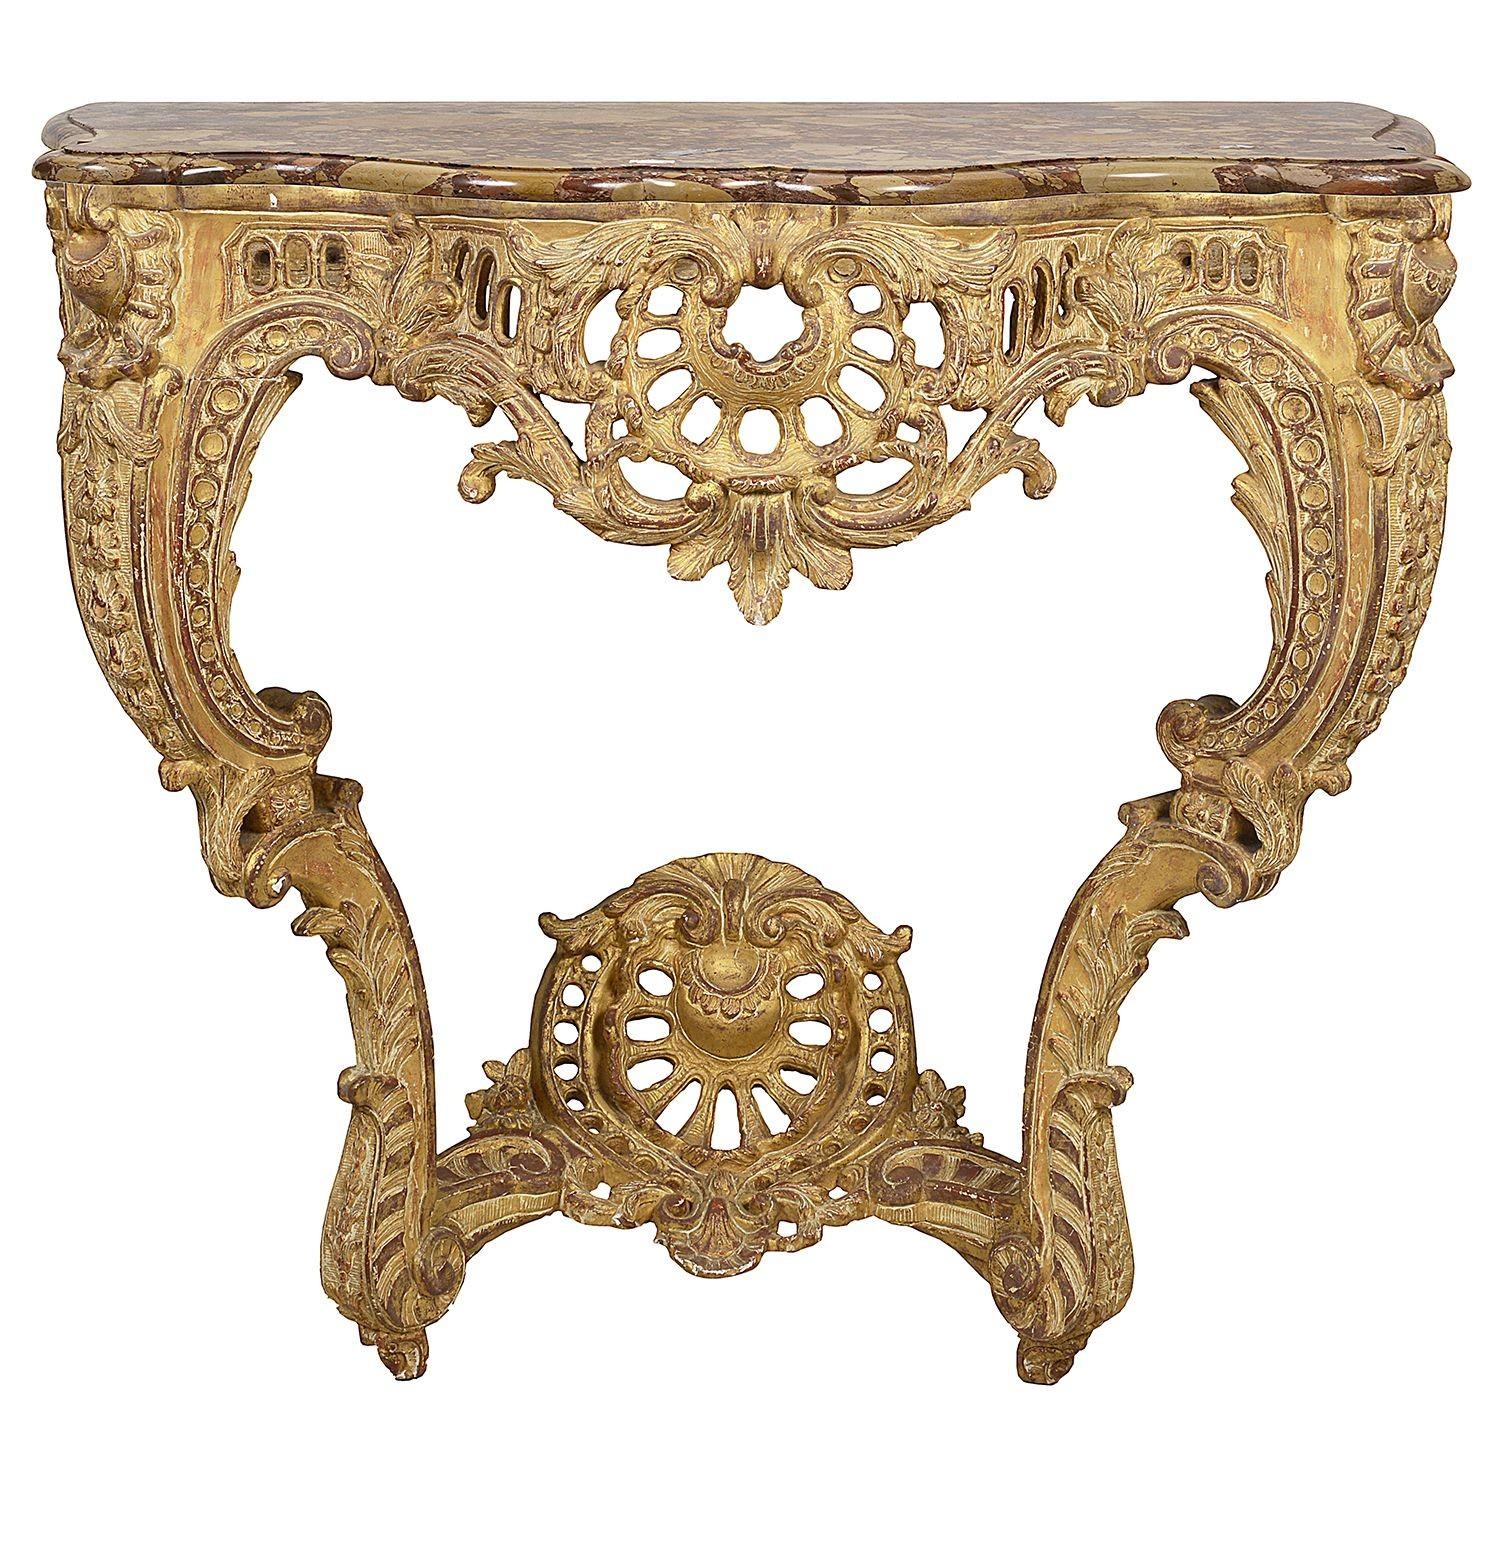 A very impressive pair of french 18th Century carved gilt wood console tables, each with their original Breccia marble tops. Wonderful scrolling rococo influenced foliate decoration with pierced fretwork, raised to the frieze and raised on carved